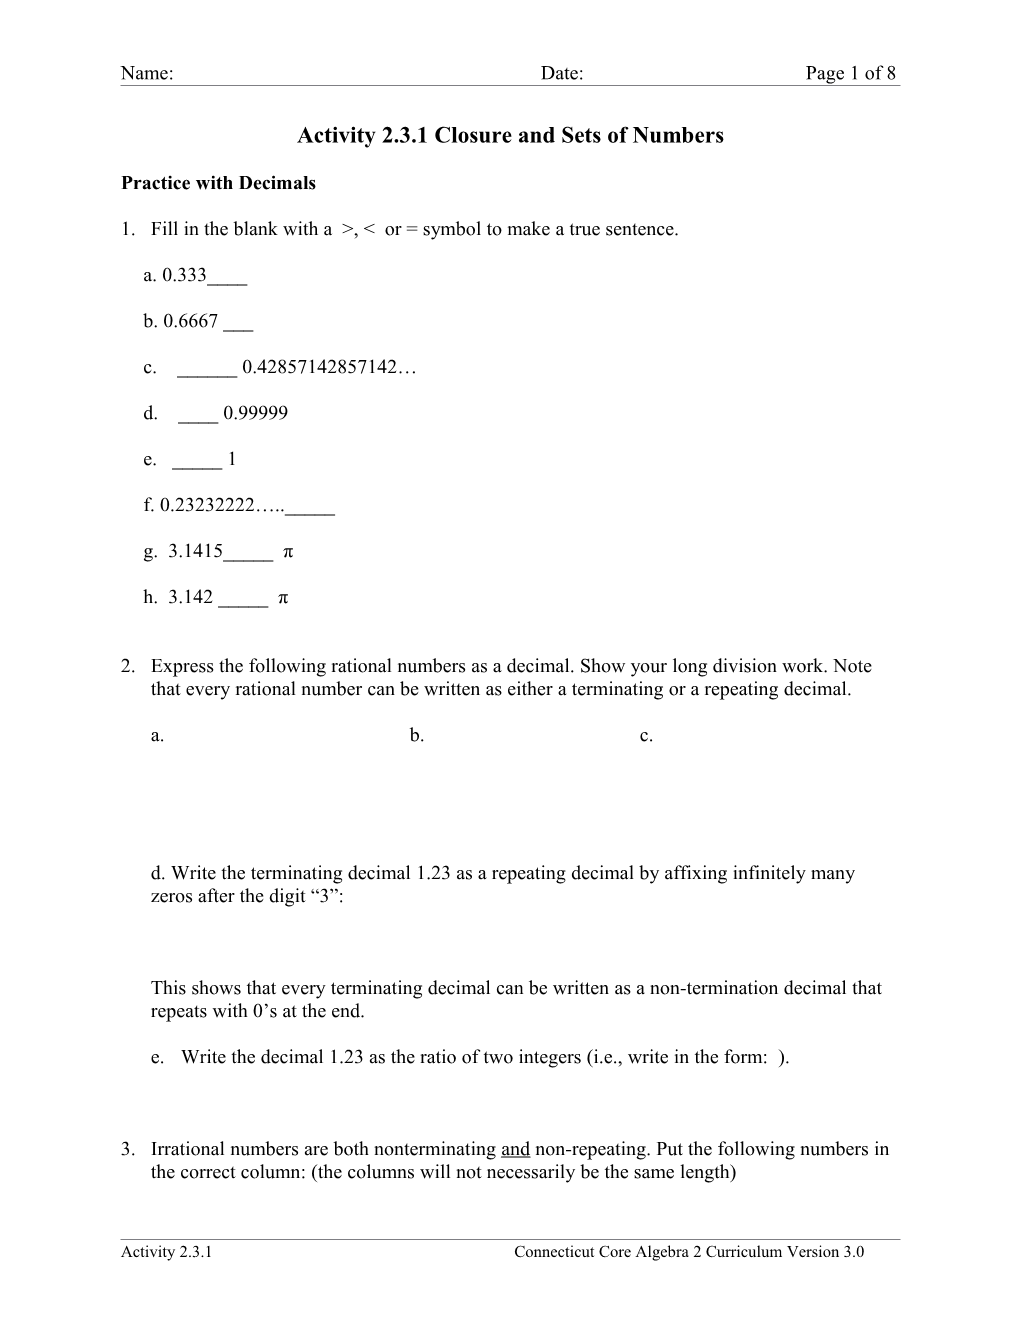 Activity 2.3.1Closure and Sets of Numbers